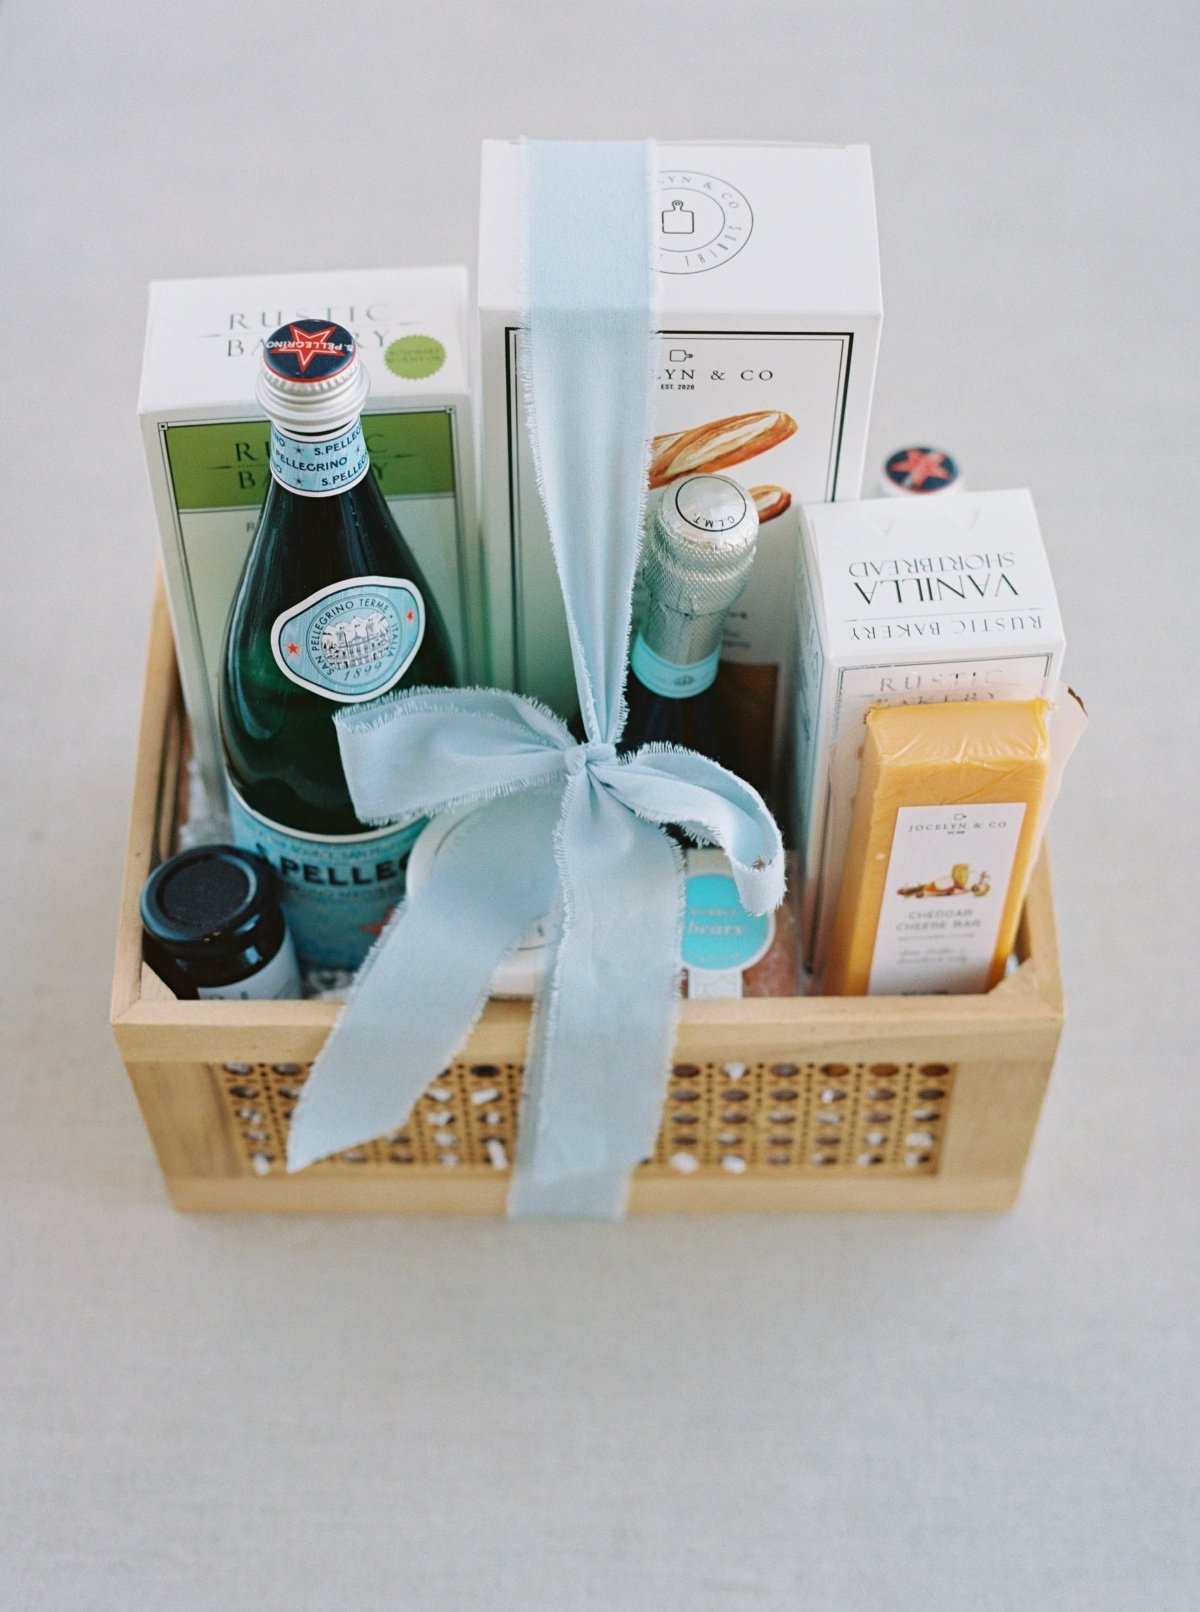 French inspired welcome basket